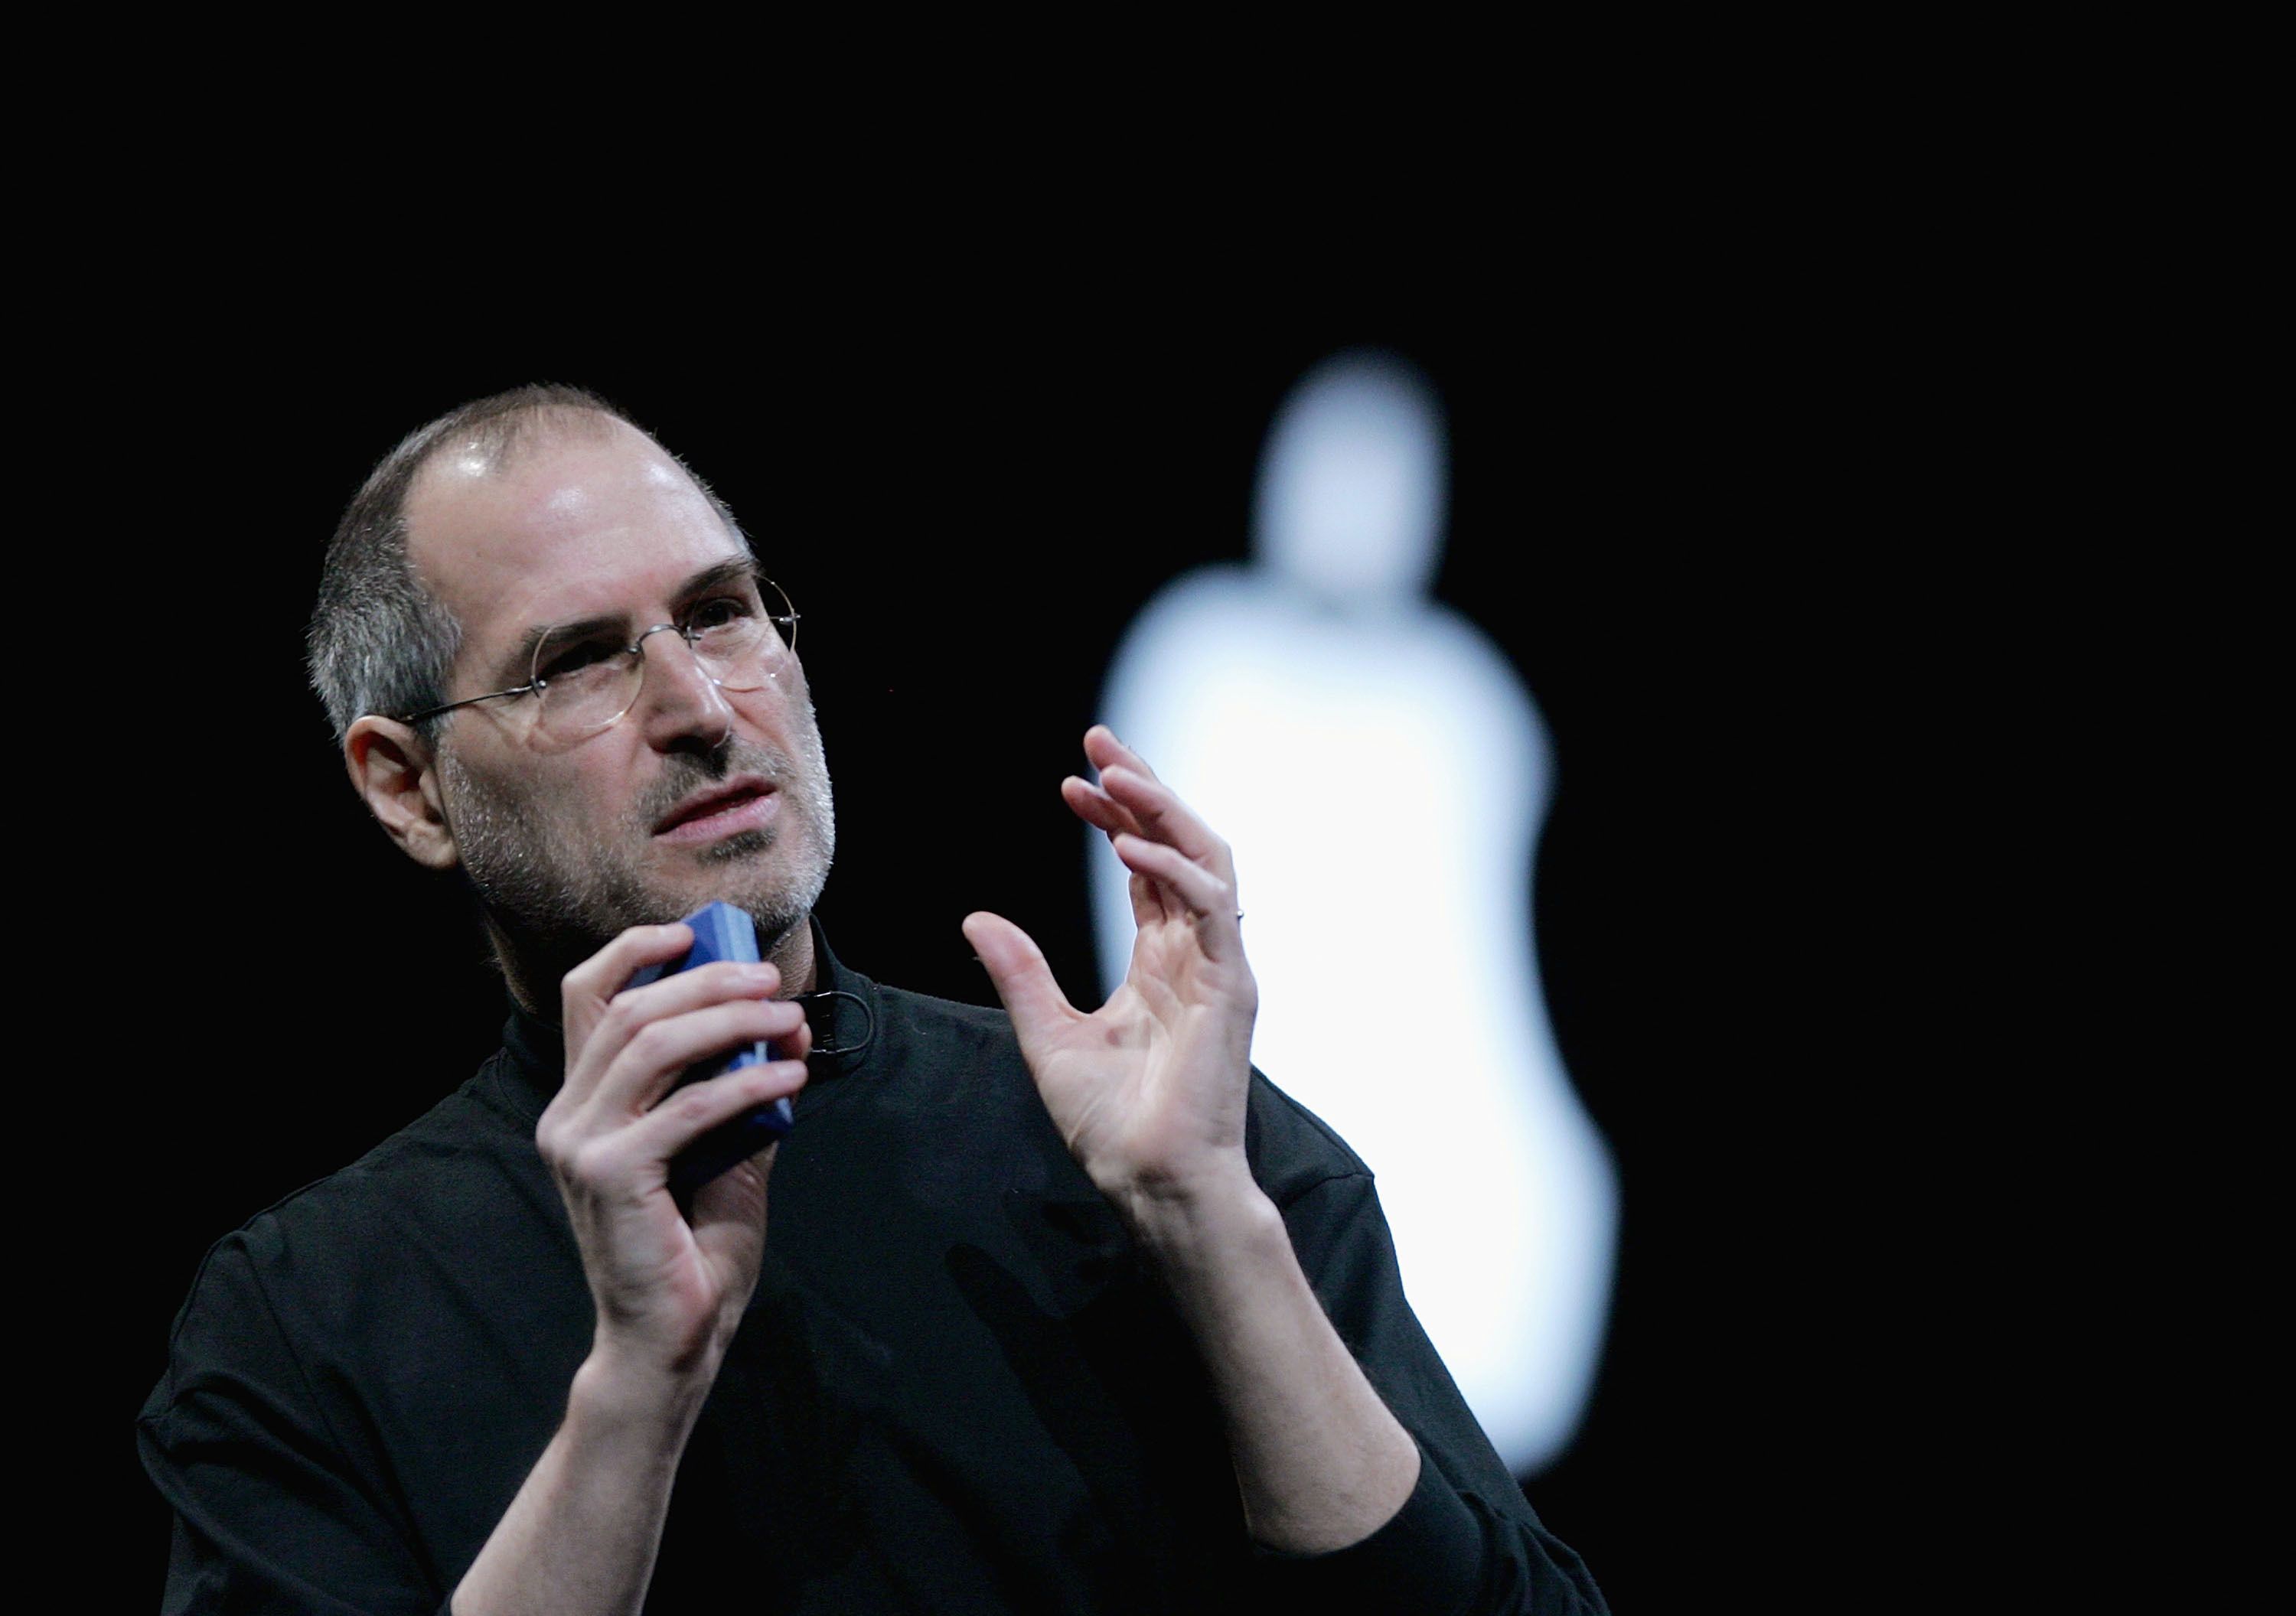 Steve Jobs Wallpaper Image Photo Picture Background